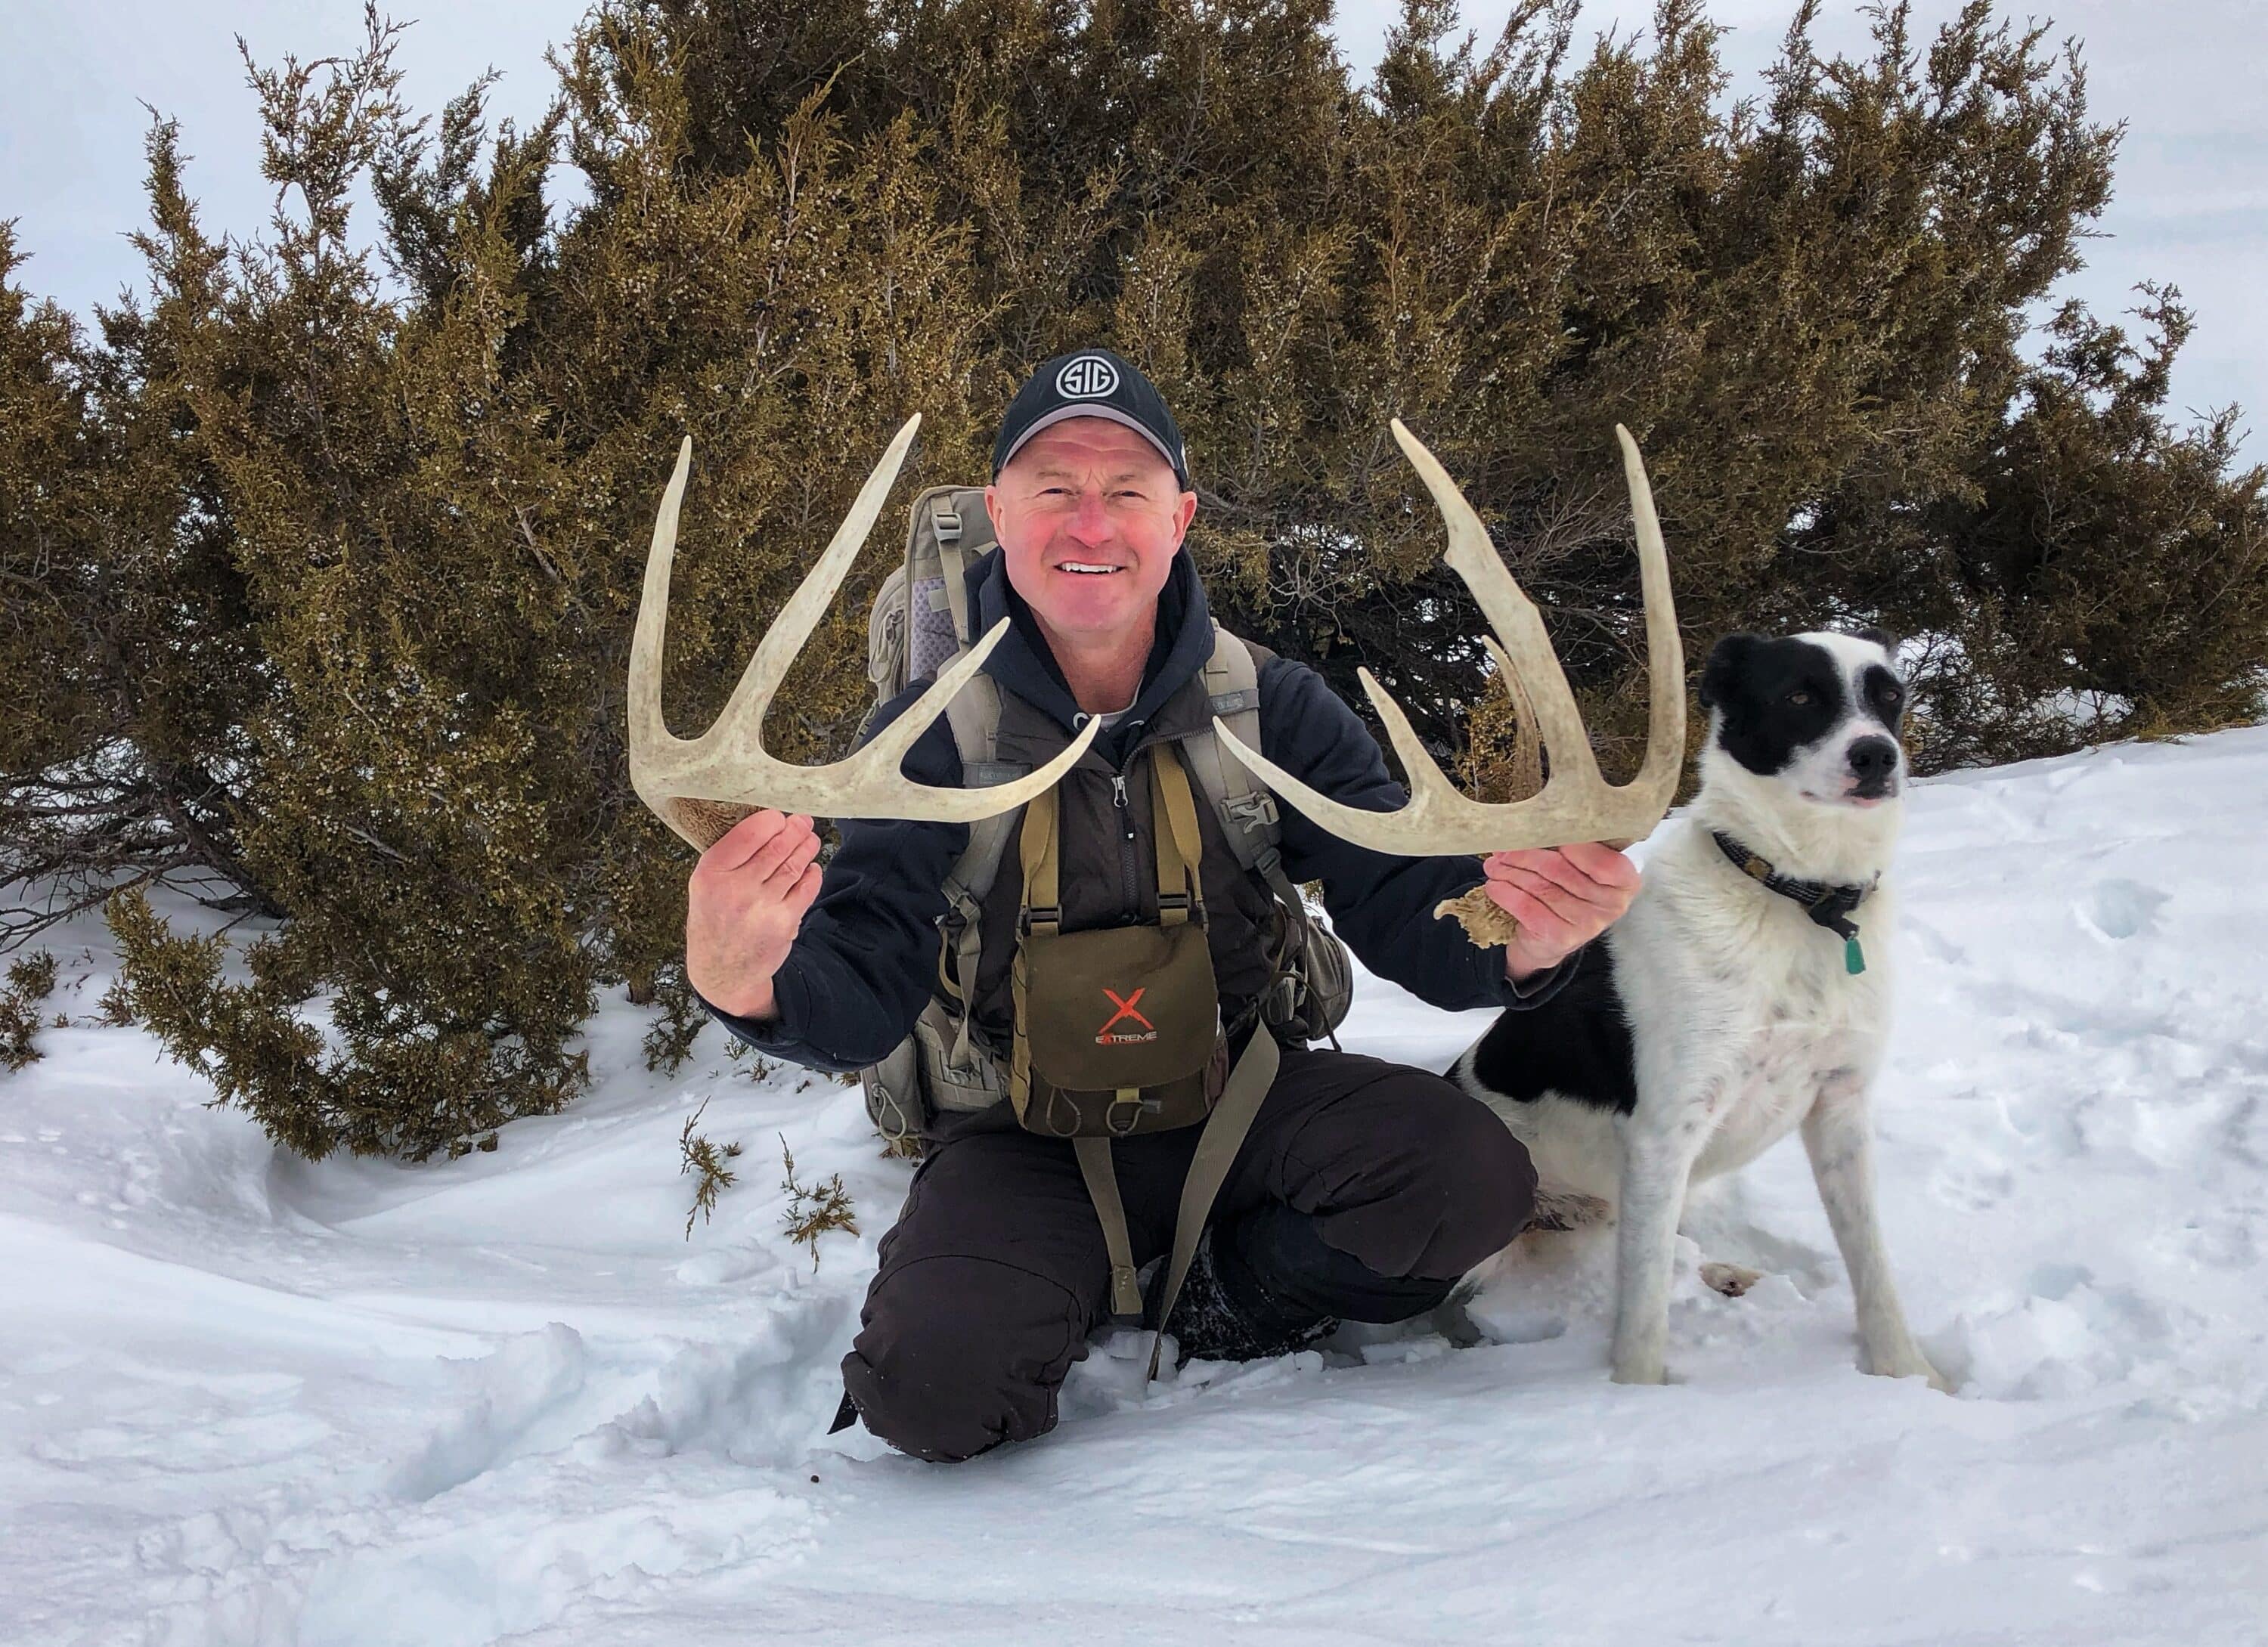 Shoot for high expectations, but shed antler discoveries can help you keep your goals grounded.